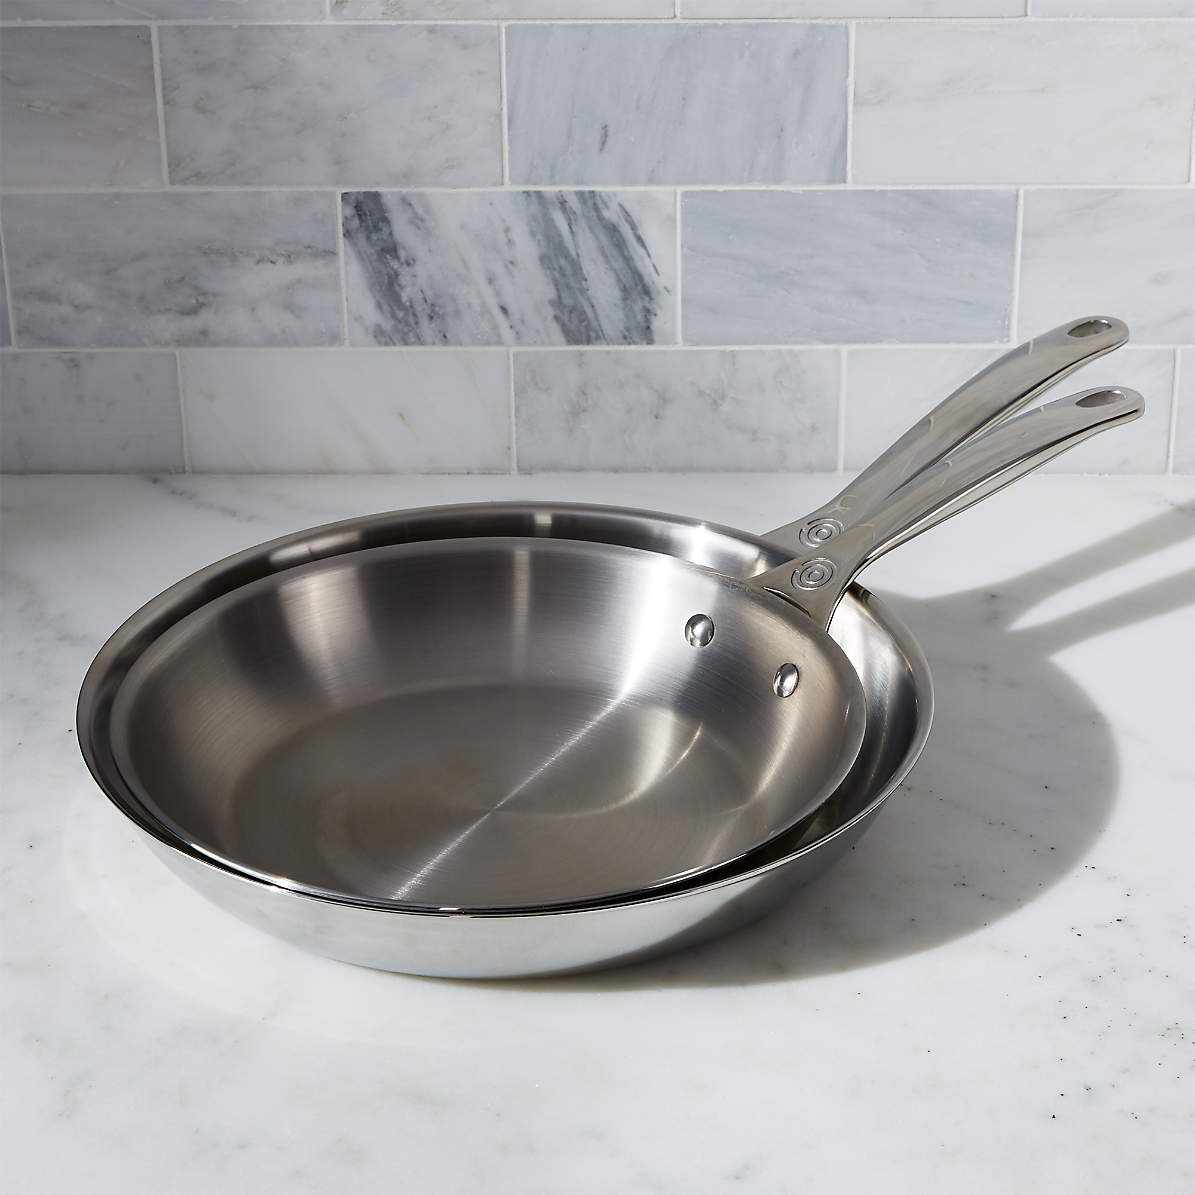 Le Creuset ~ Stainless Steel ~ 6 Piece Set (8 Nonstick Fry Pan, 10 Fry Pan,  2 qt. Saucepan w/ Lid & 3.5 qt. Nonstick Saucier Pan with Lid), Price  $525.00 in Pittsburgh, PA from Contemporary Concepts